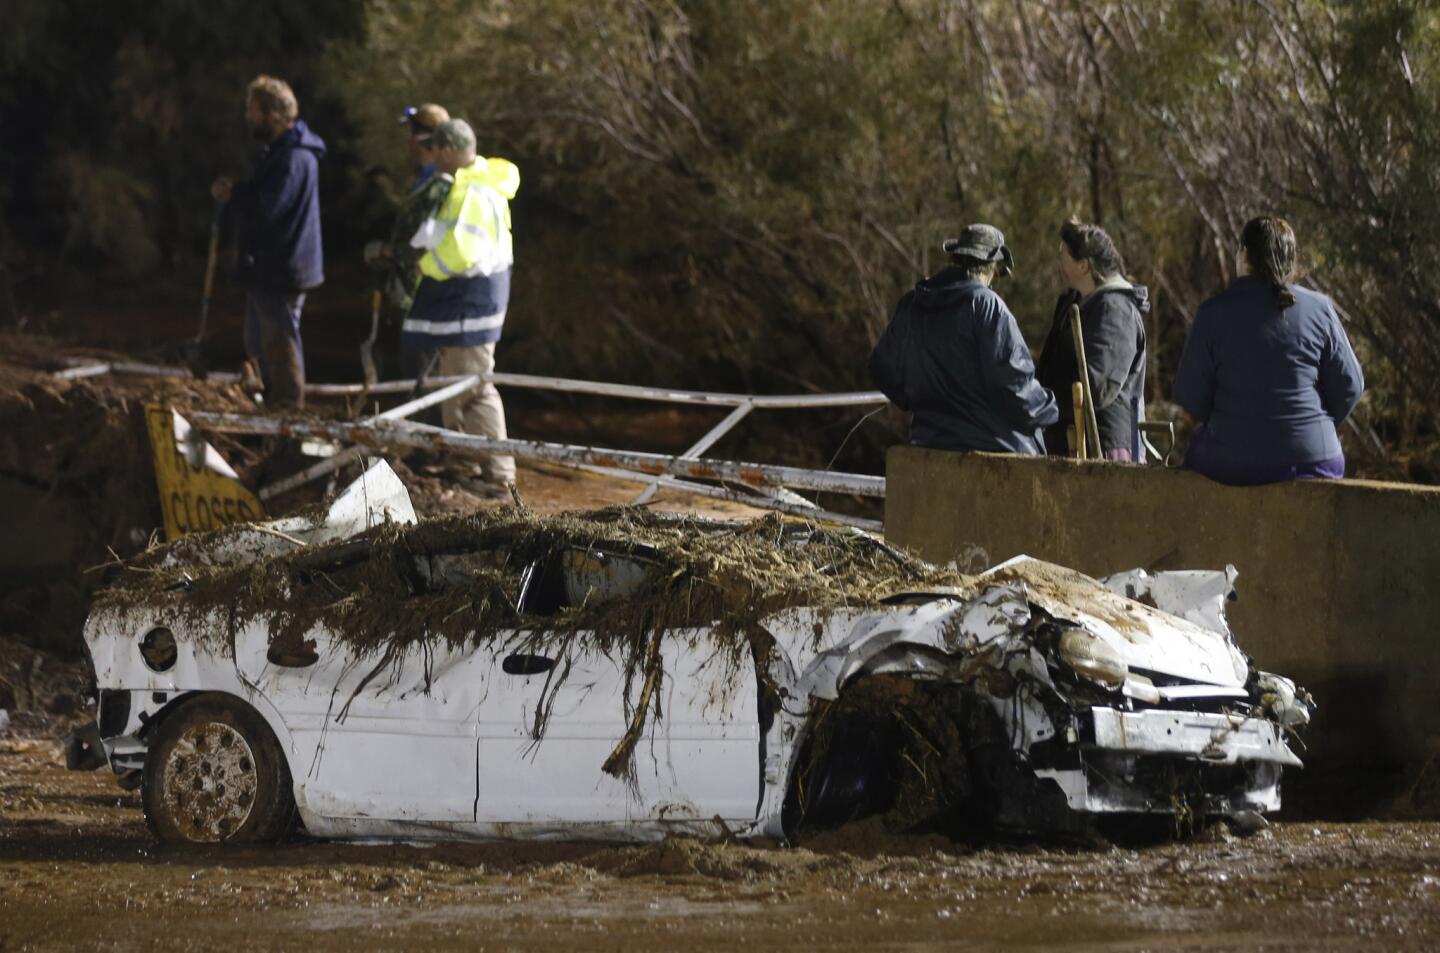 A car sits on the side of the road after being pulled from Short Creek as rescuers and others watch large construction equipment remove flood debris from Short Creek where it crosses Central Street in Hildale, Utah.